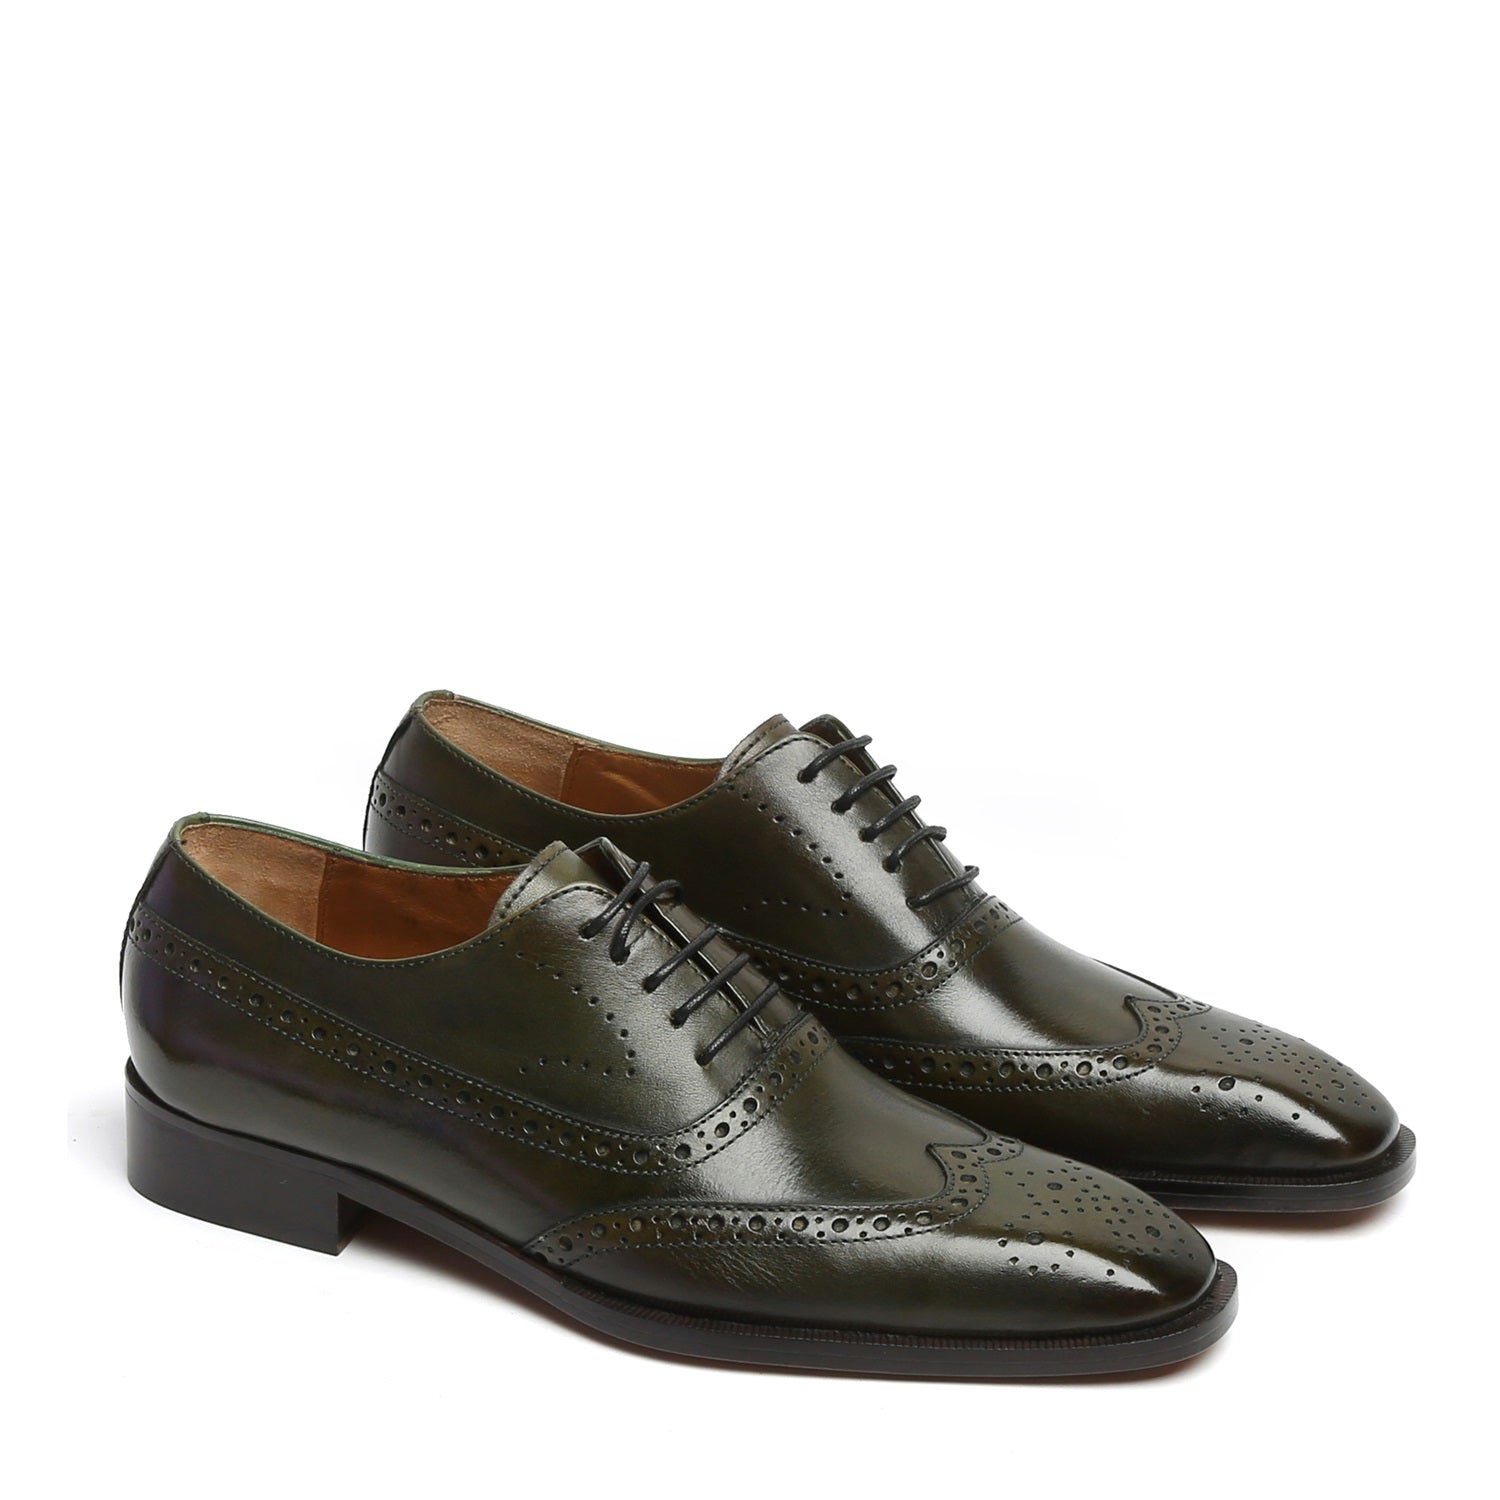 Olive Long Tail Brogue Leather Shoes By Brune & Bareskin